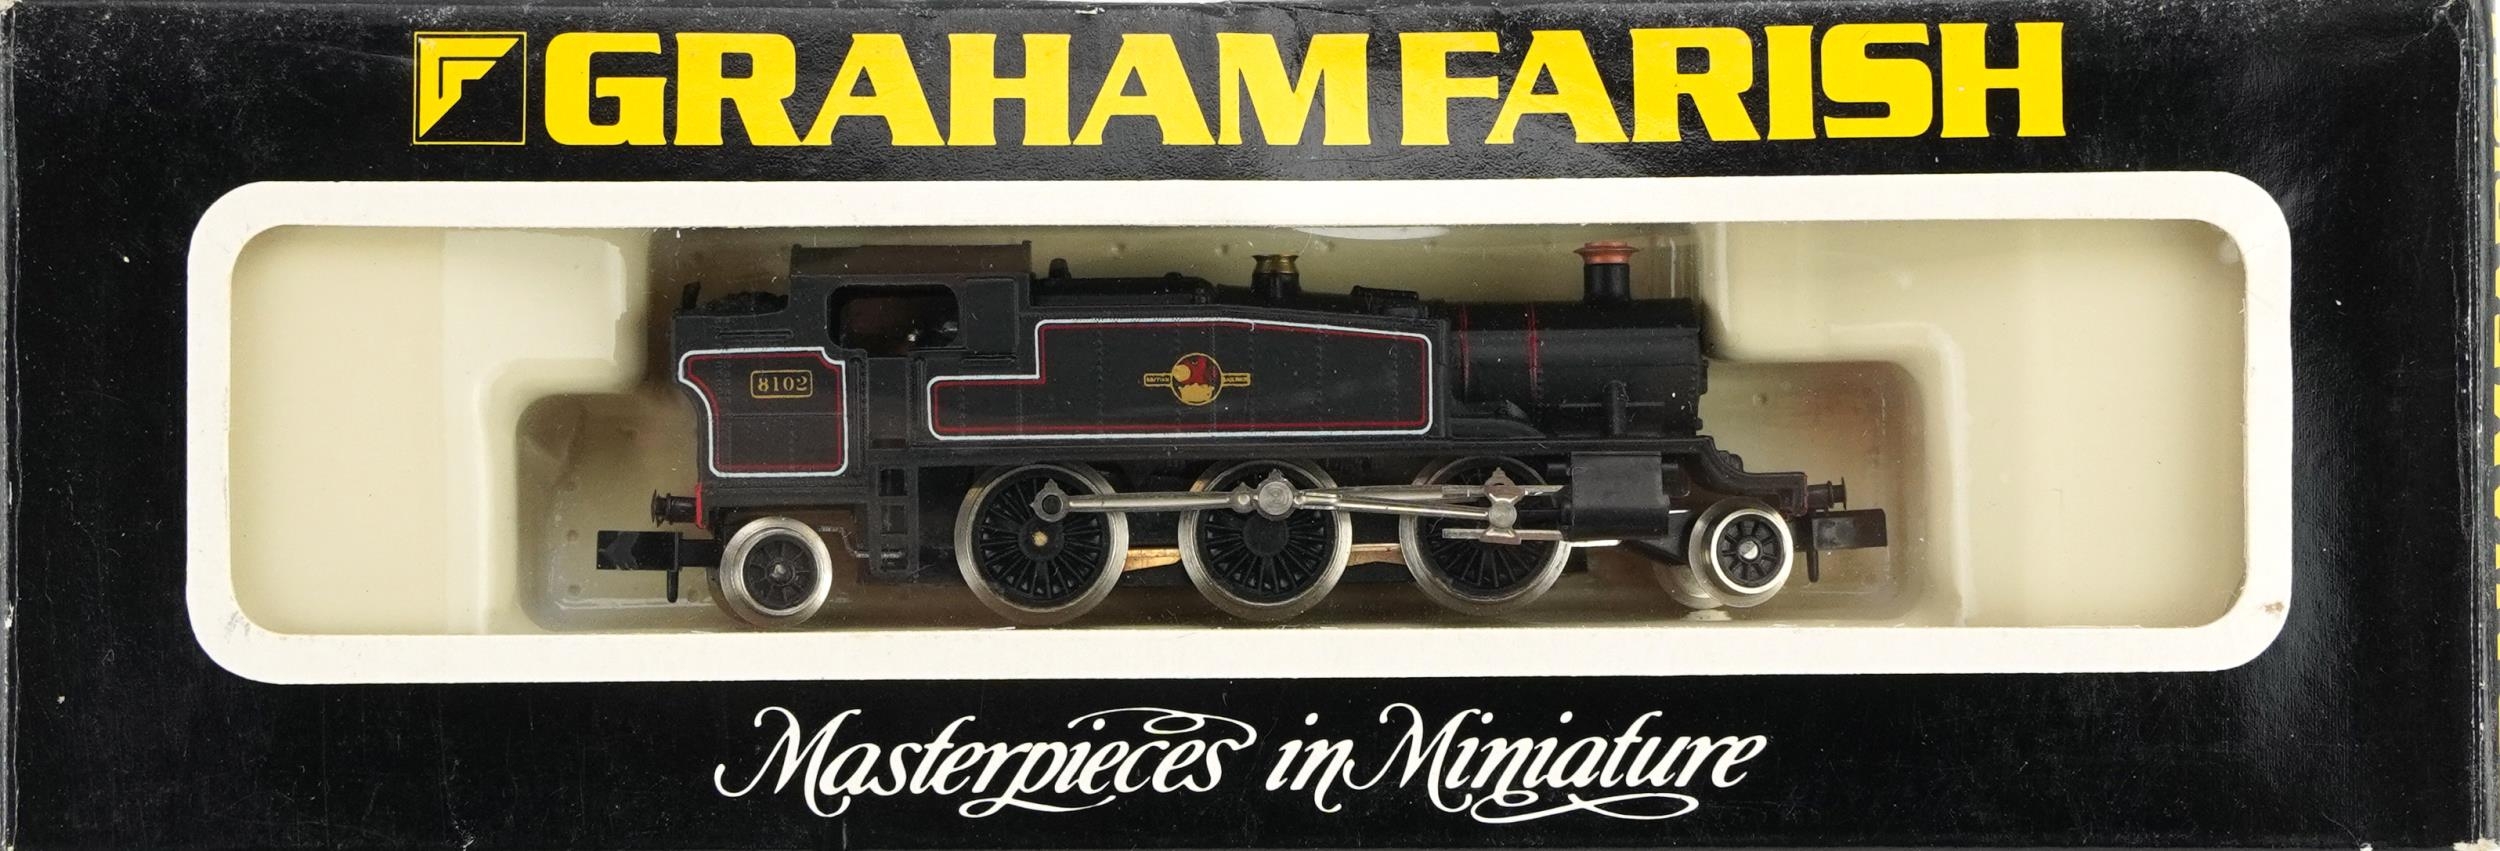 Two Graham Farish N gauge model railway locomotives with cases, numbers 1606 and 371-019 - Image 2 of 3